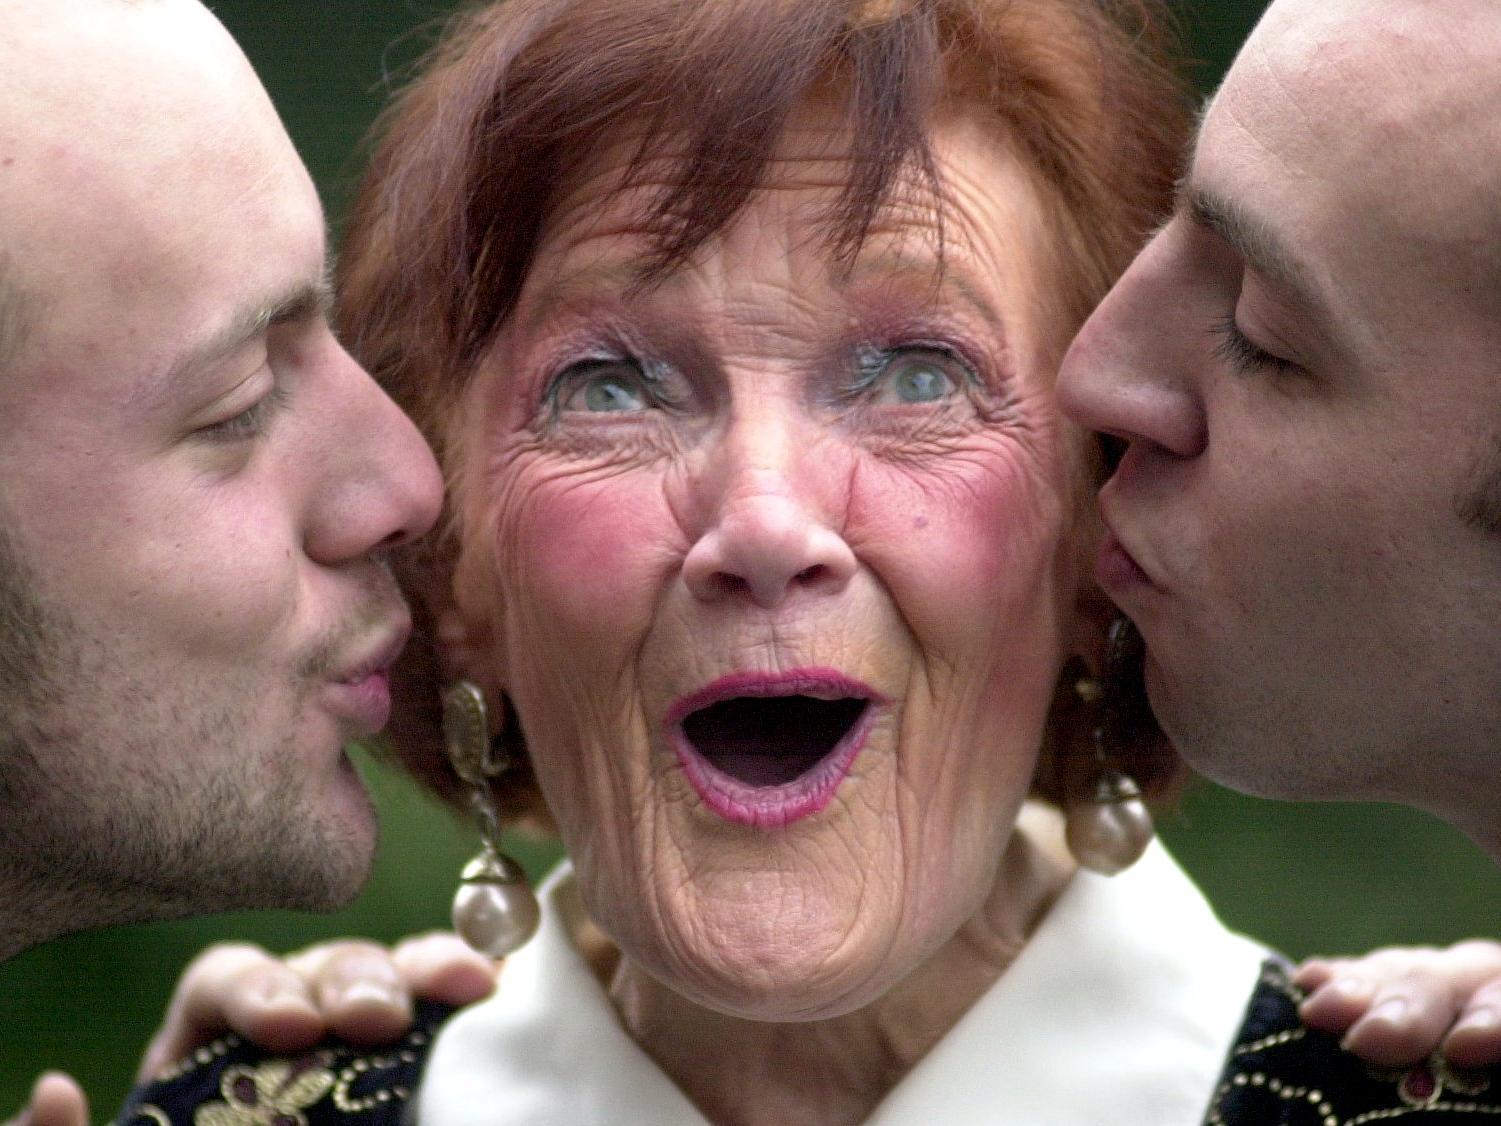 Auditions for TV's Blind Date were held the Crown Plaza on Wellington Street in January 2001. Pictured is Kathy Jones  who received a kiss from two other applicants Jai Branch (left) and Steven Schools (right).